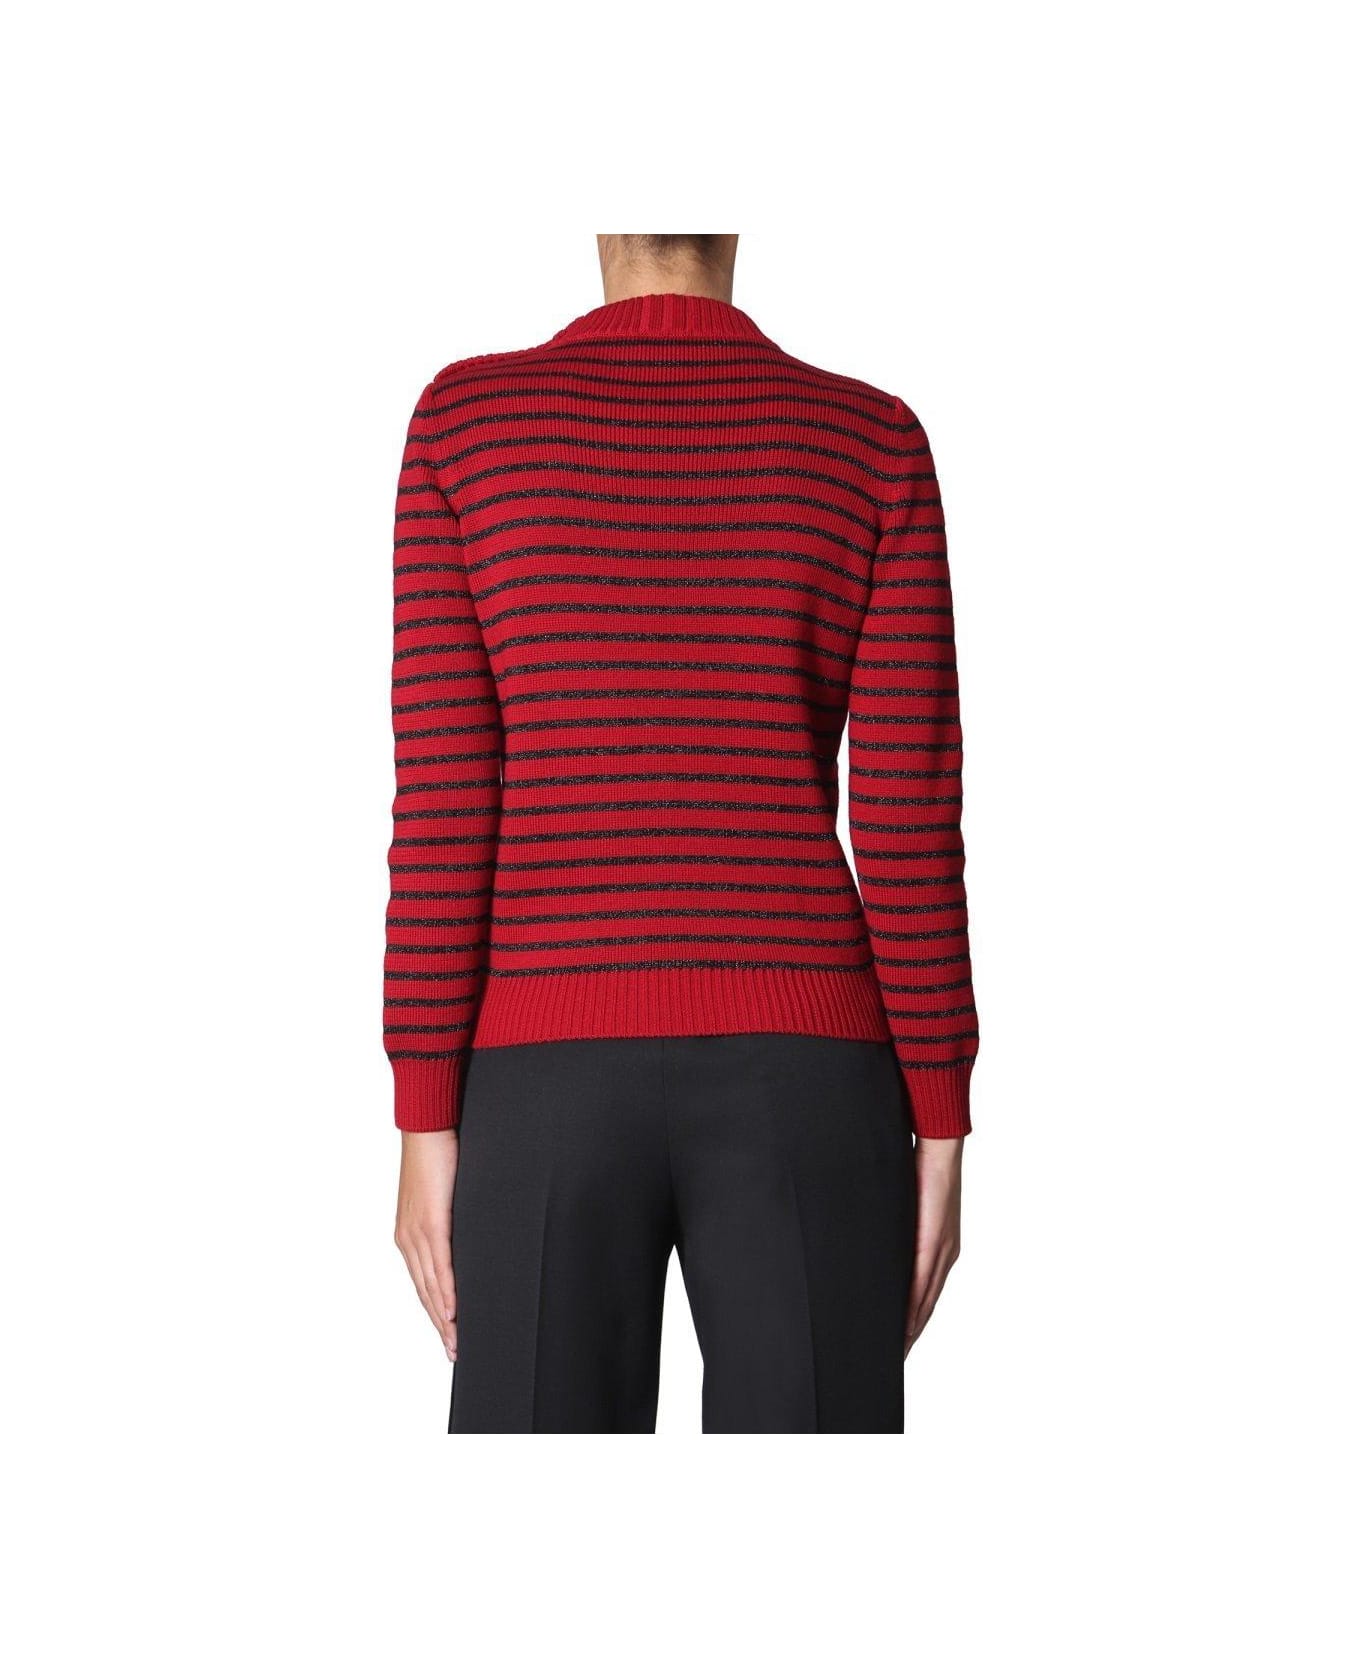 Saint Laurent Striped Knit Sweater - RED